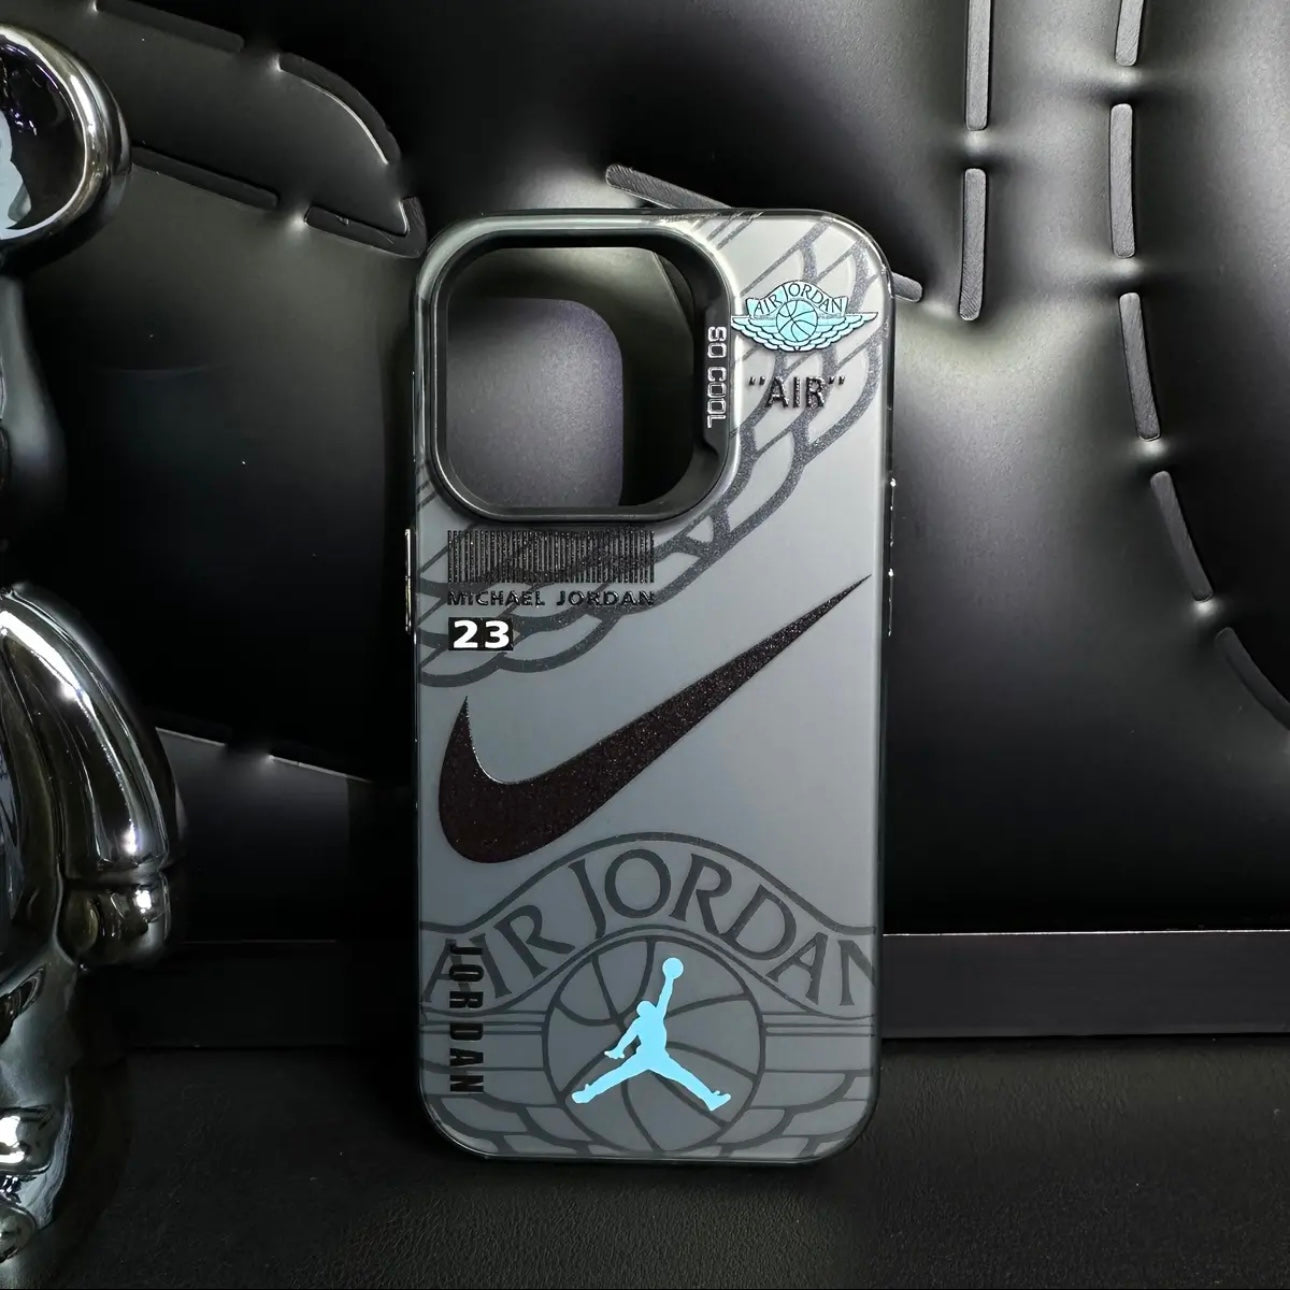 New Sports iPhone case